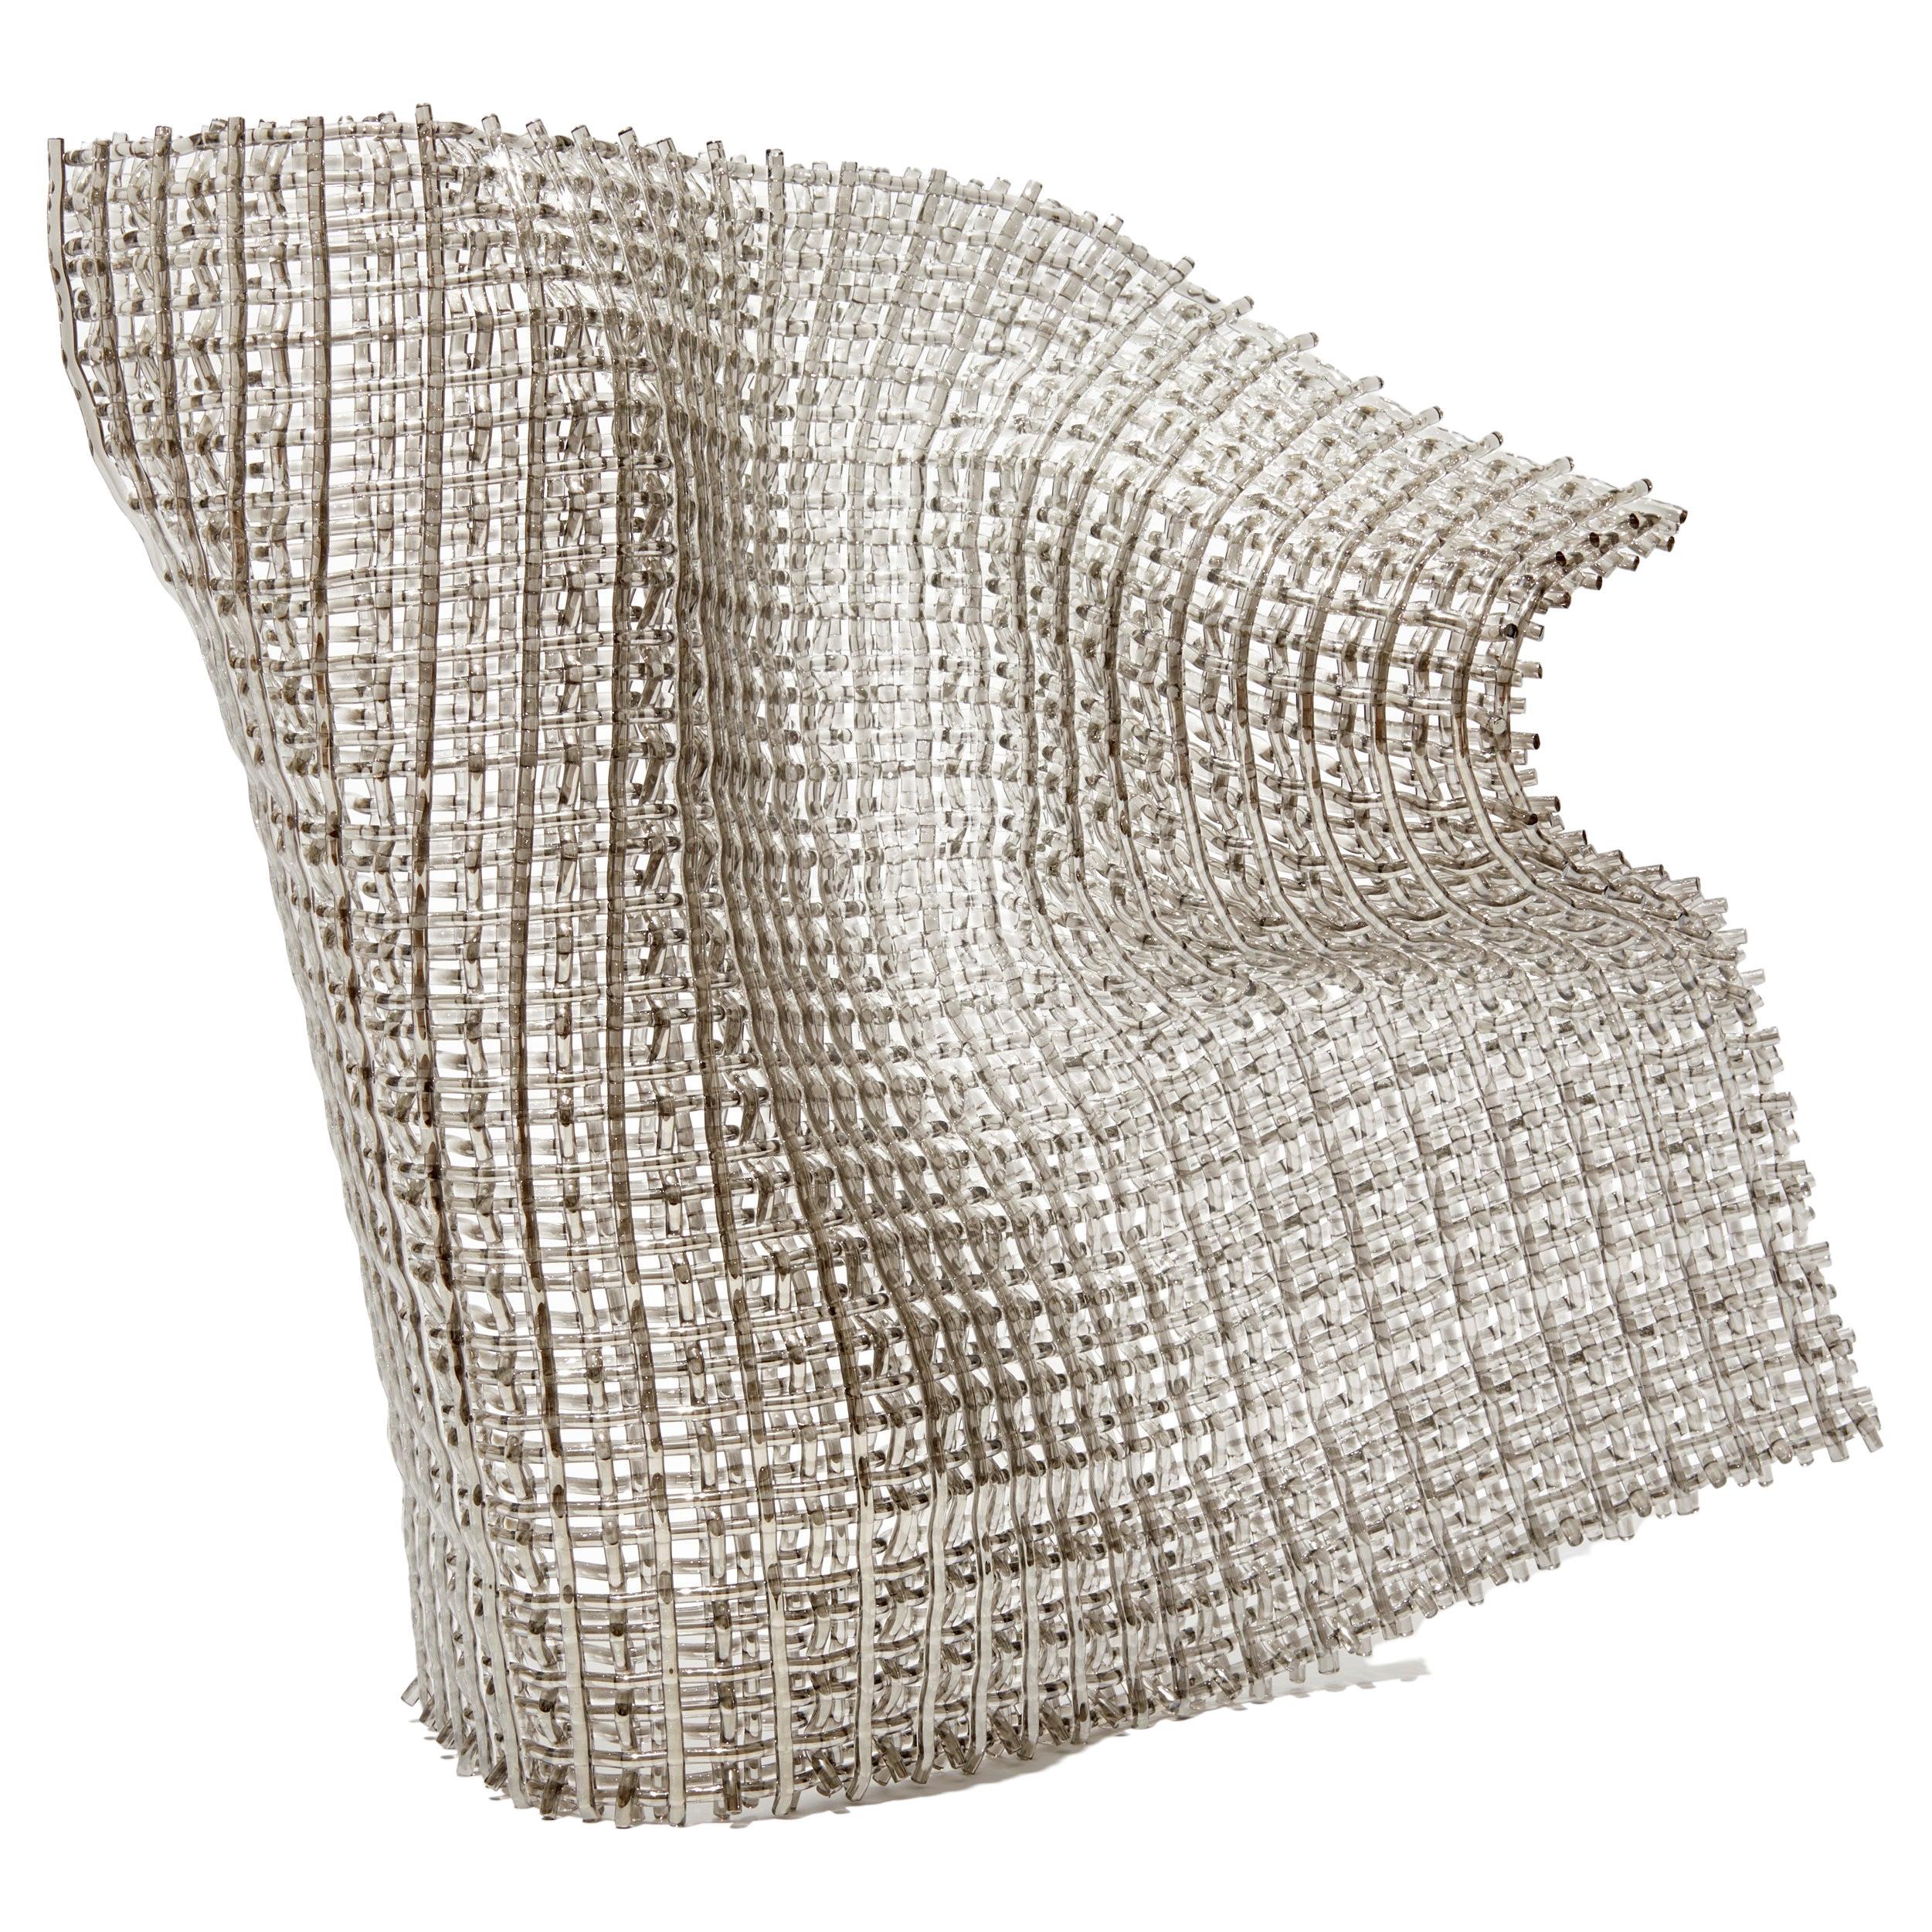  Harmony, a Silver & Clear Woven Glass Standing Sculpture by Cathryn Shilling